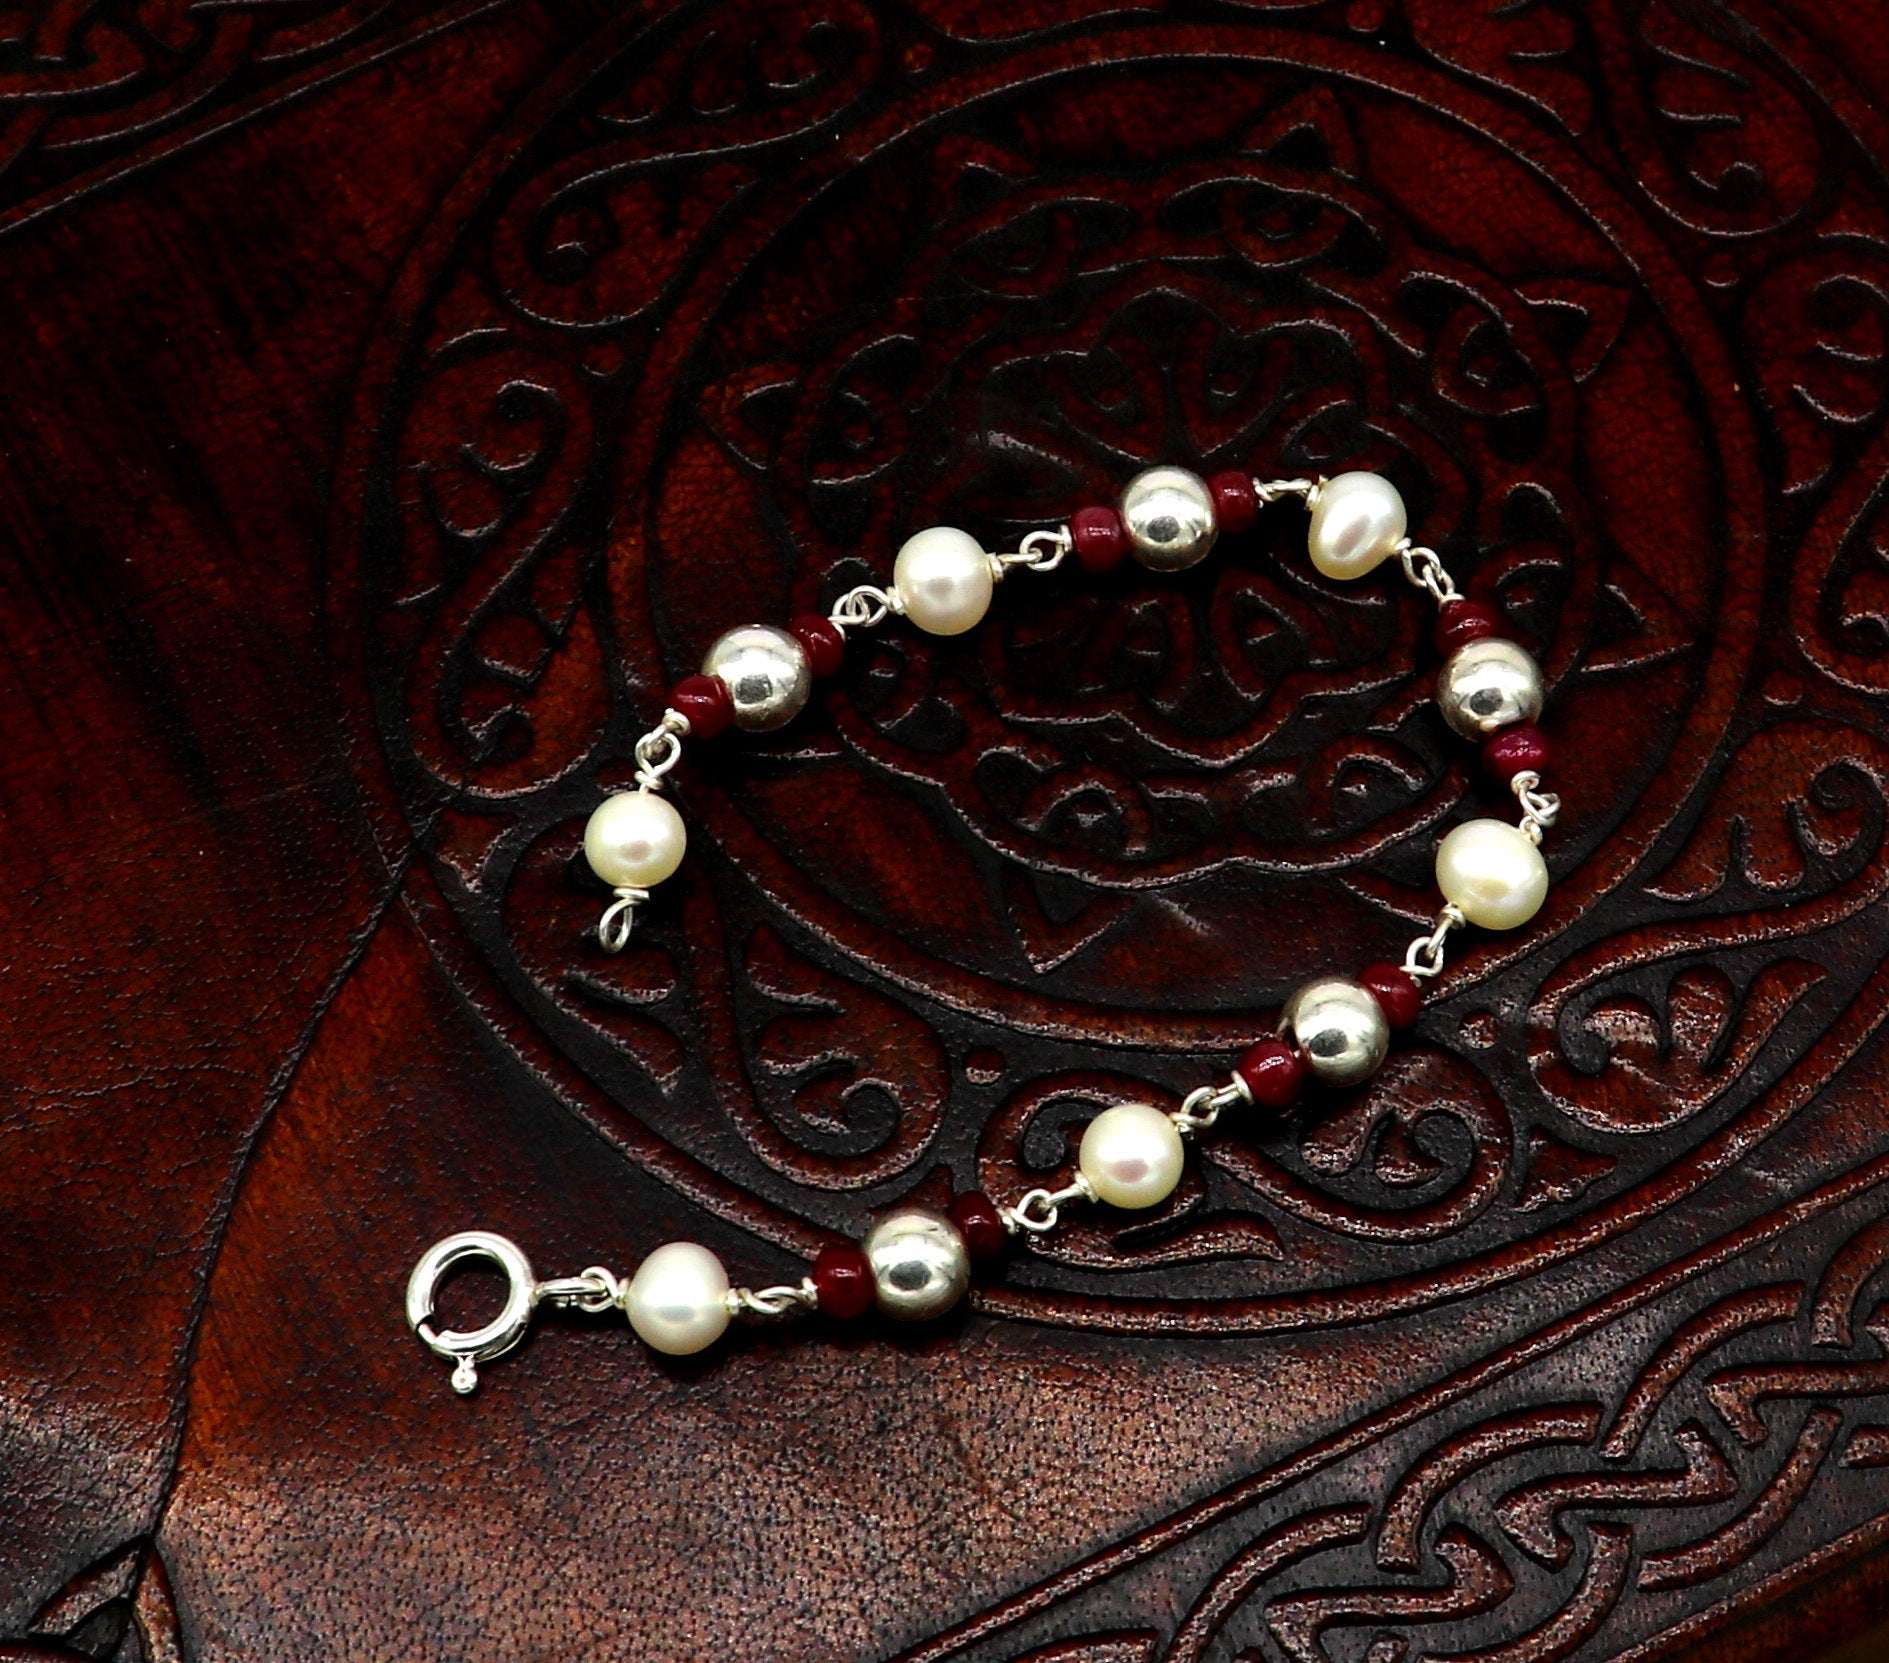 5mm silver and pearl beaded 925 sterling silver handmade customized baby bracelet, fabulous gifting kids jewelry, new born baby jewelry bbr4 - TRIBAL ORNAMENTS